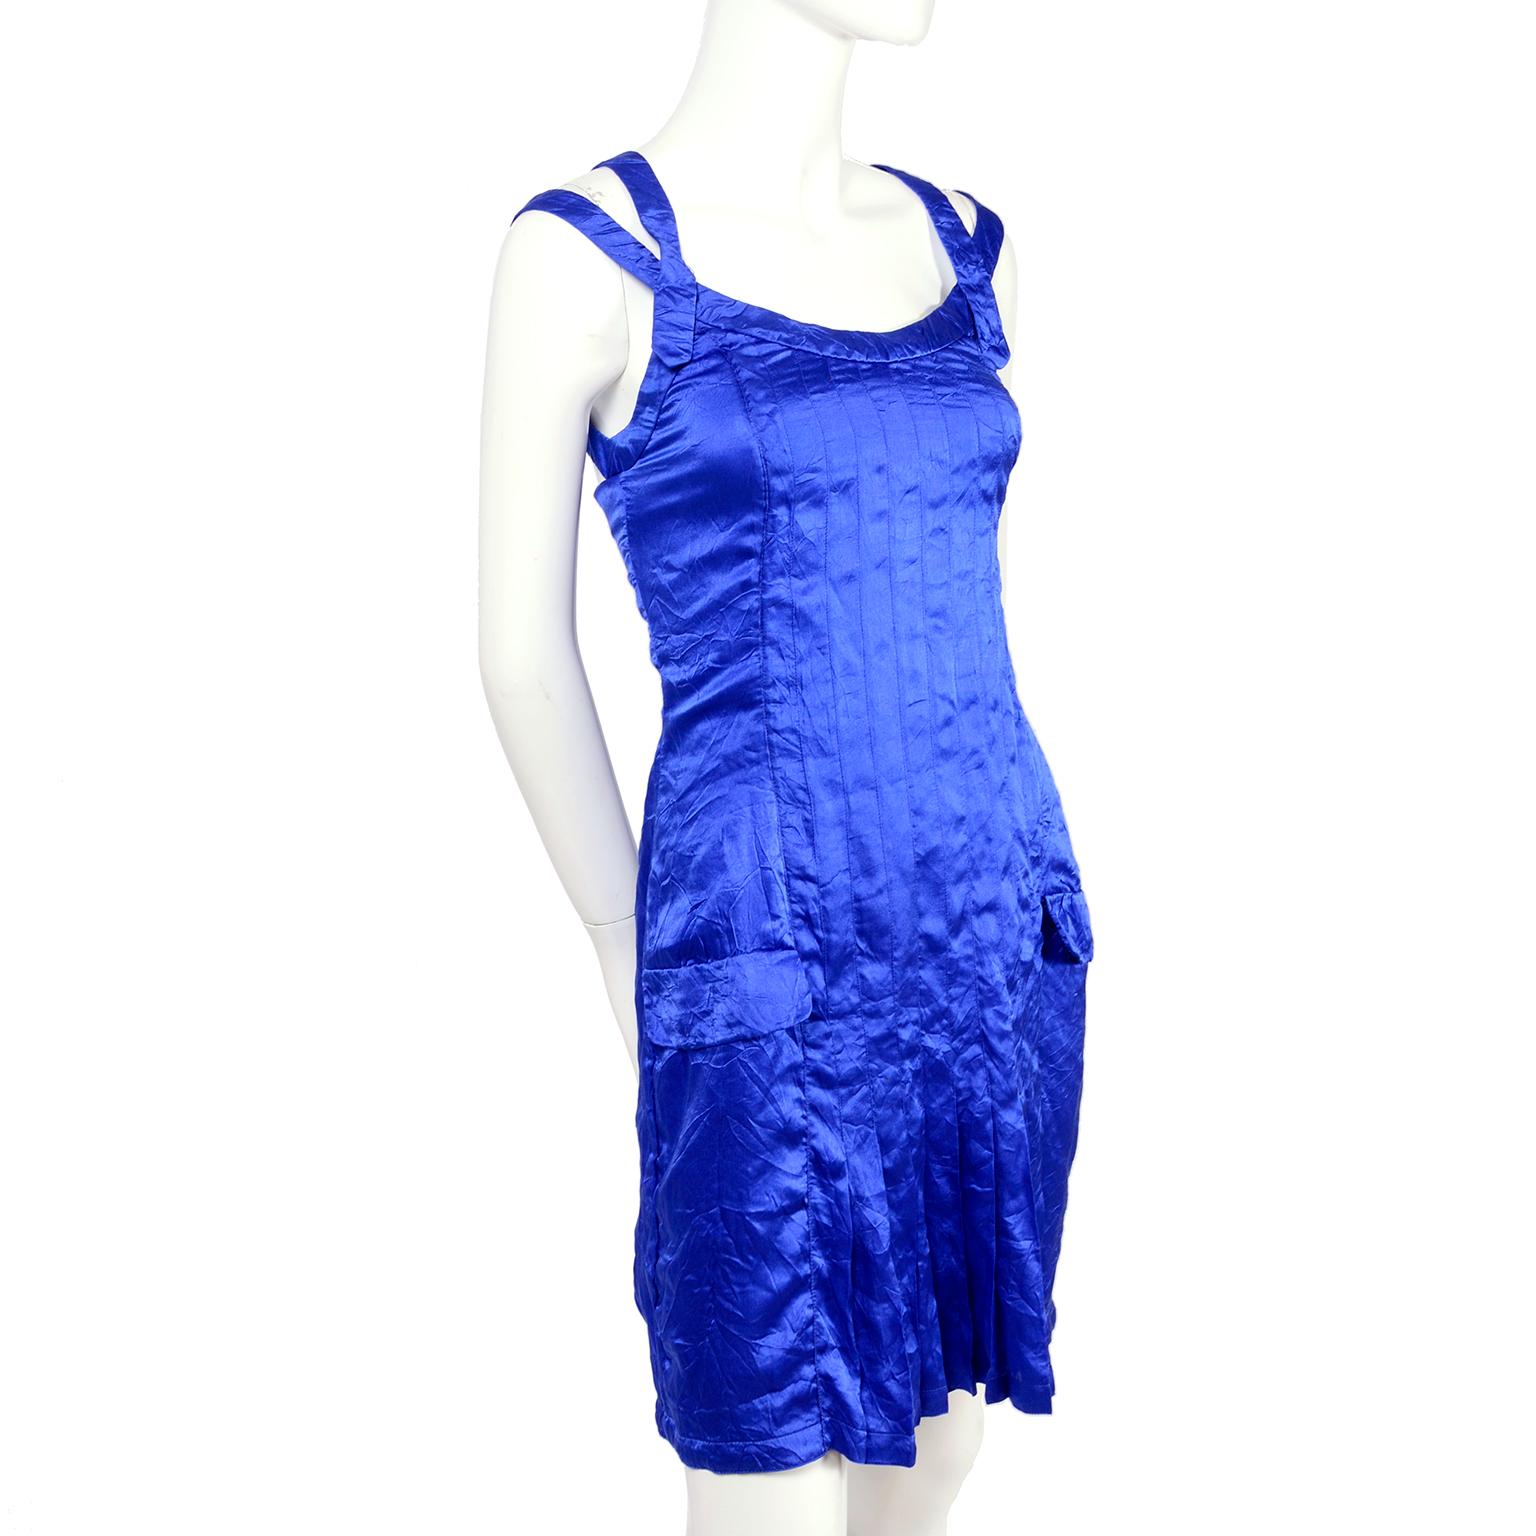 Gianni Versace Couture Blue Silk Documented Runway Dress, 1994  For Sale 4